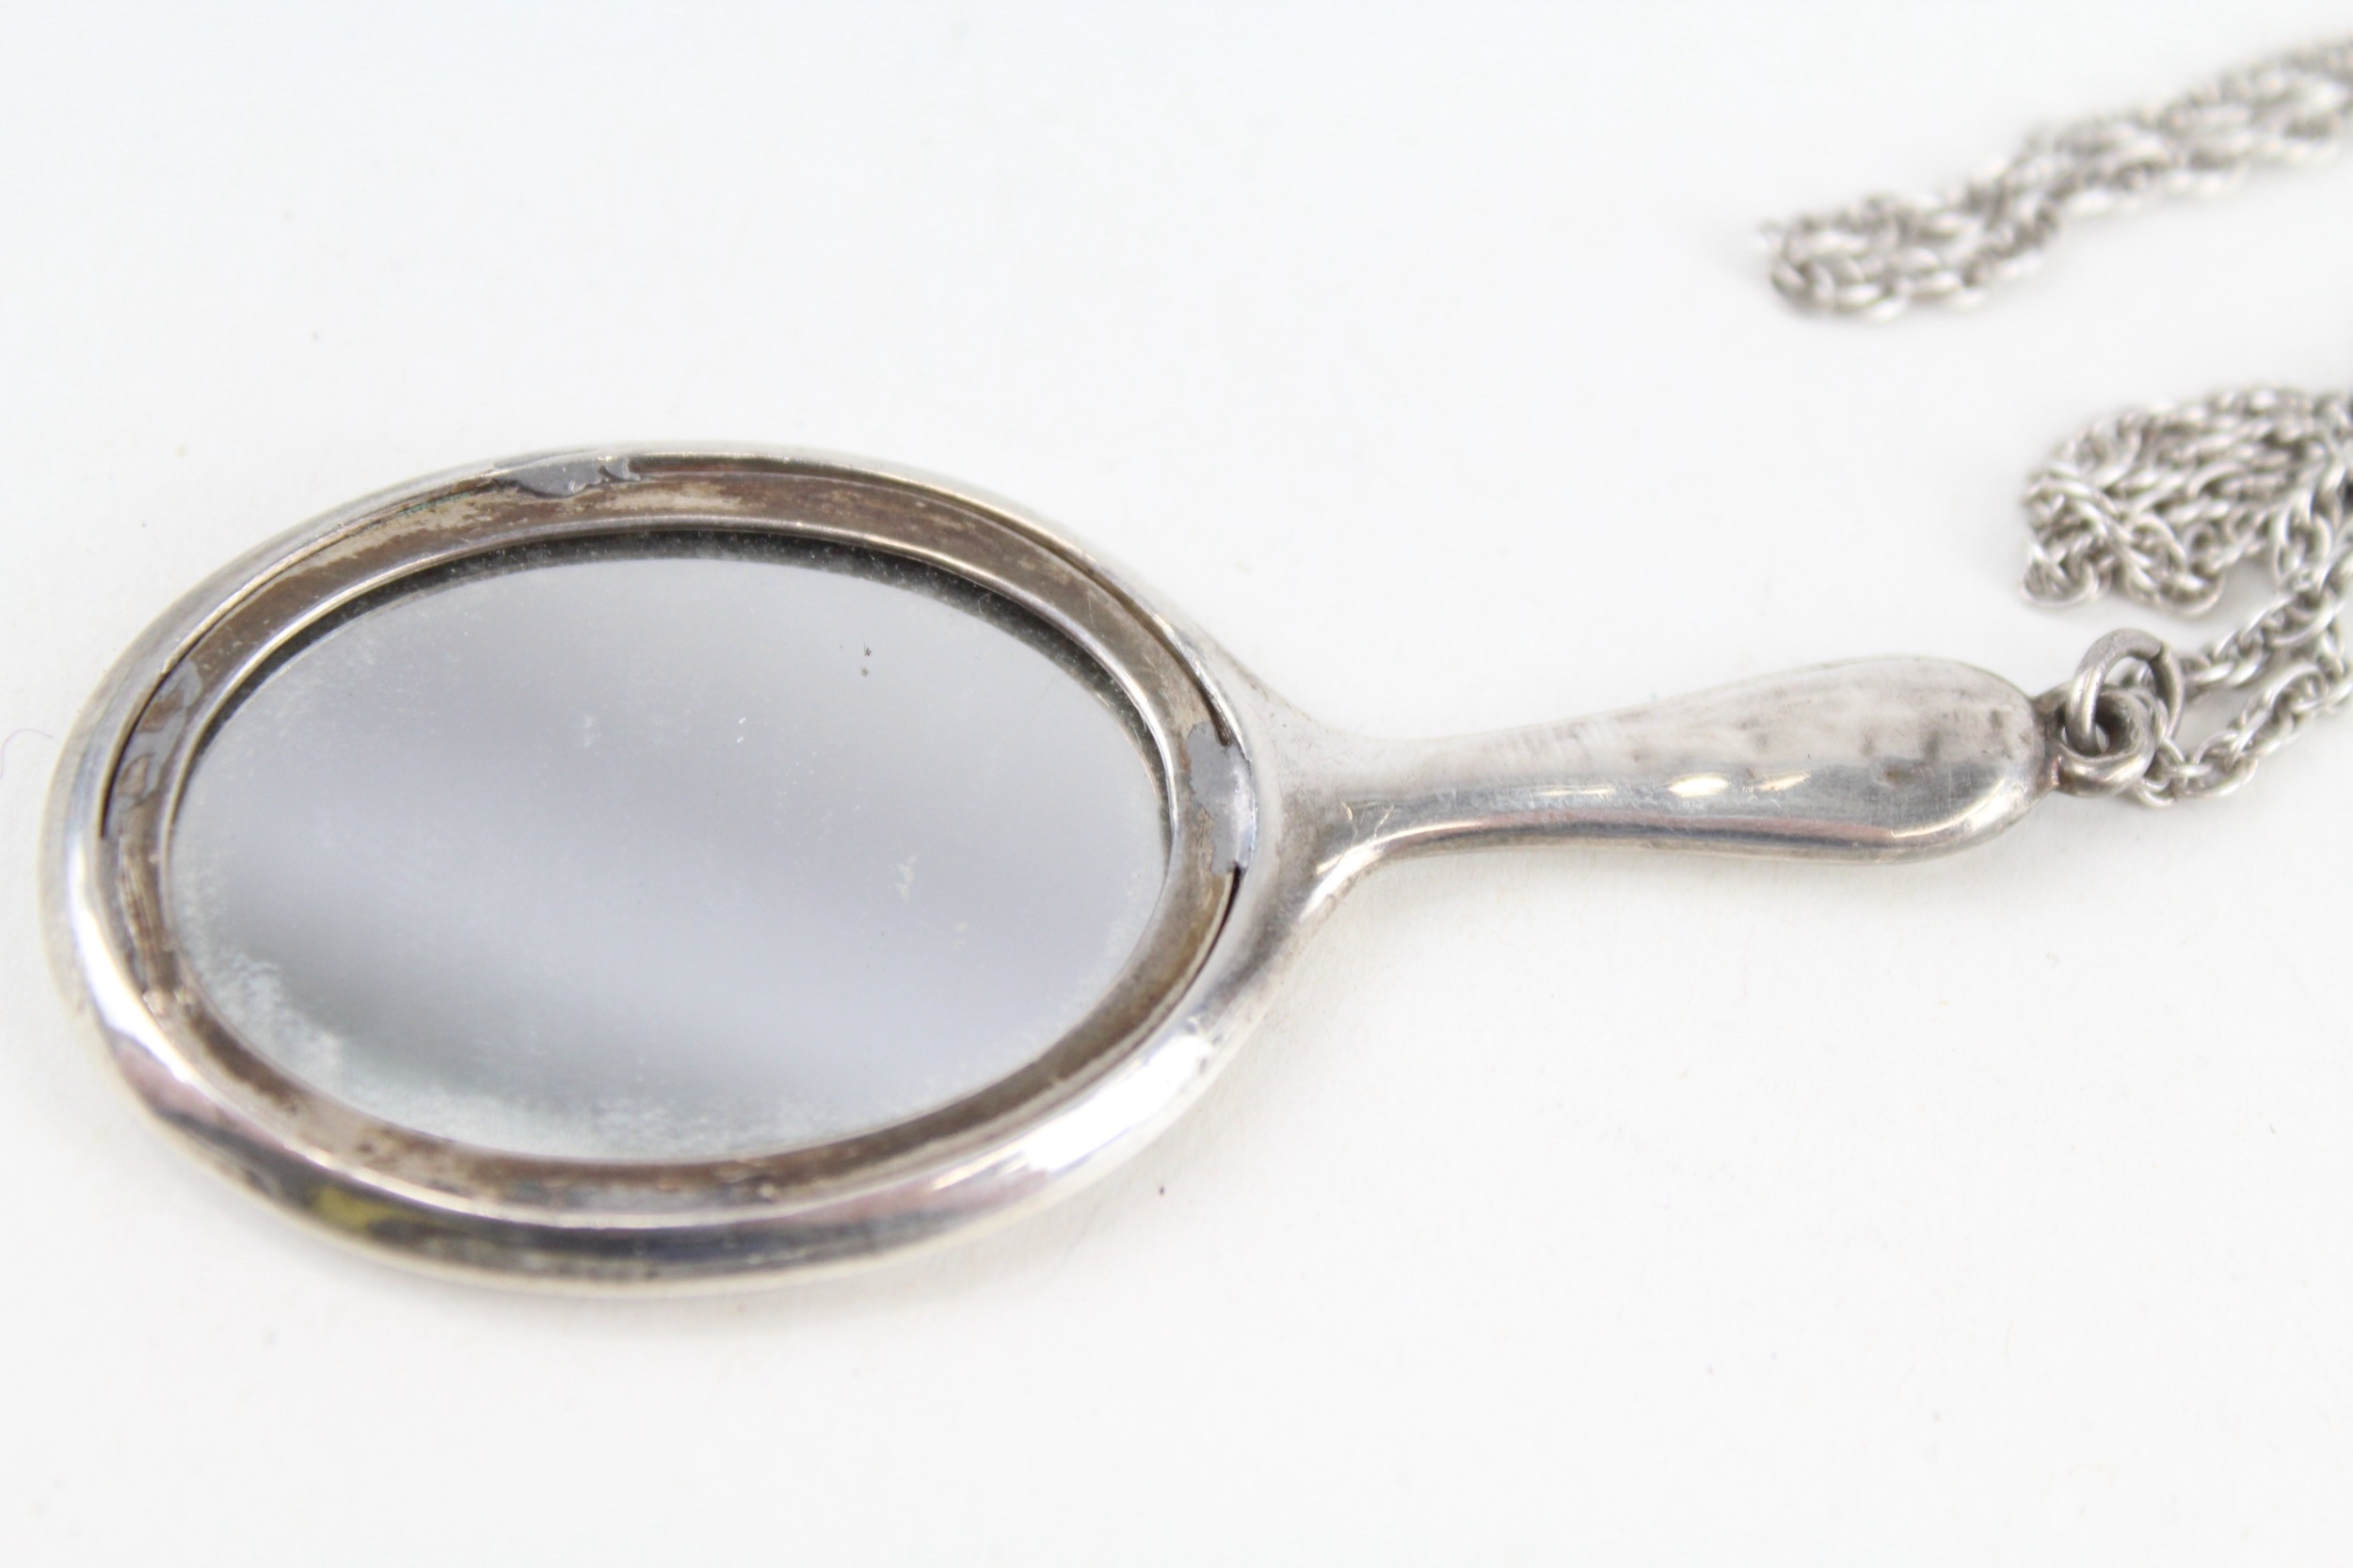 An antique novelty silver mirror pendant and chain (15g) - Image 3 of 4